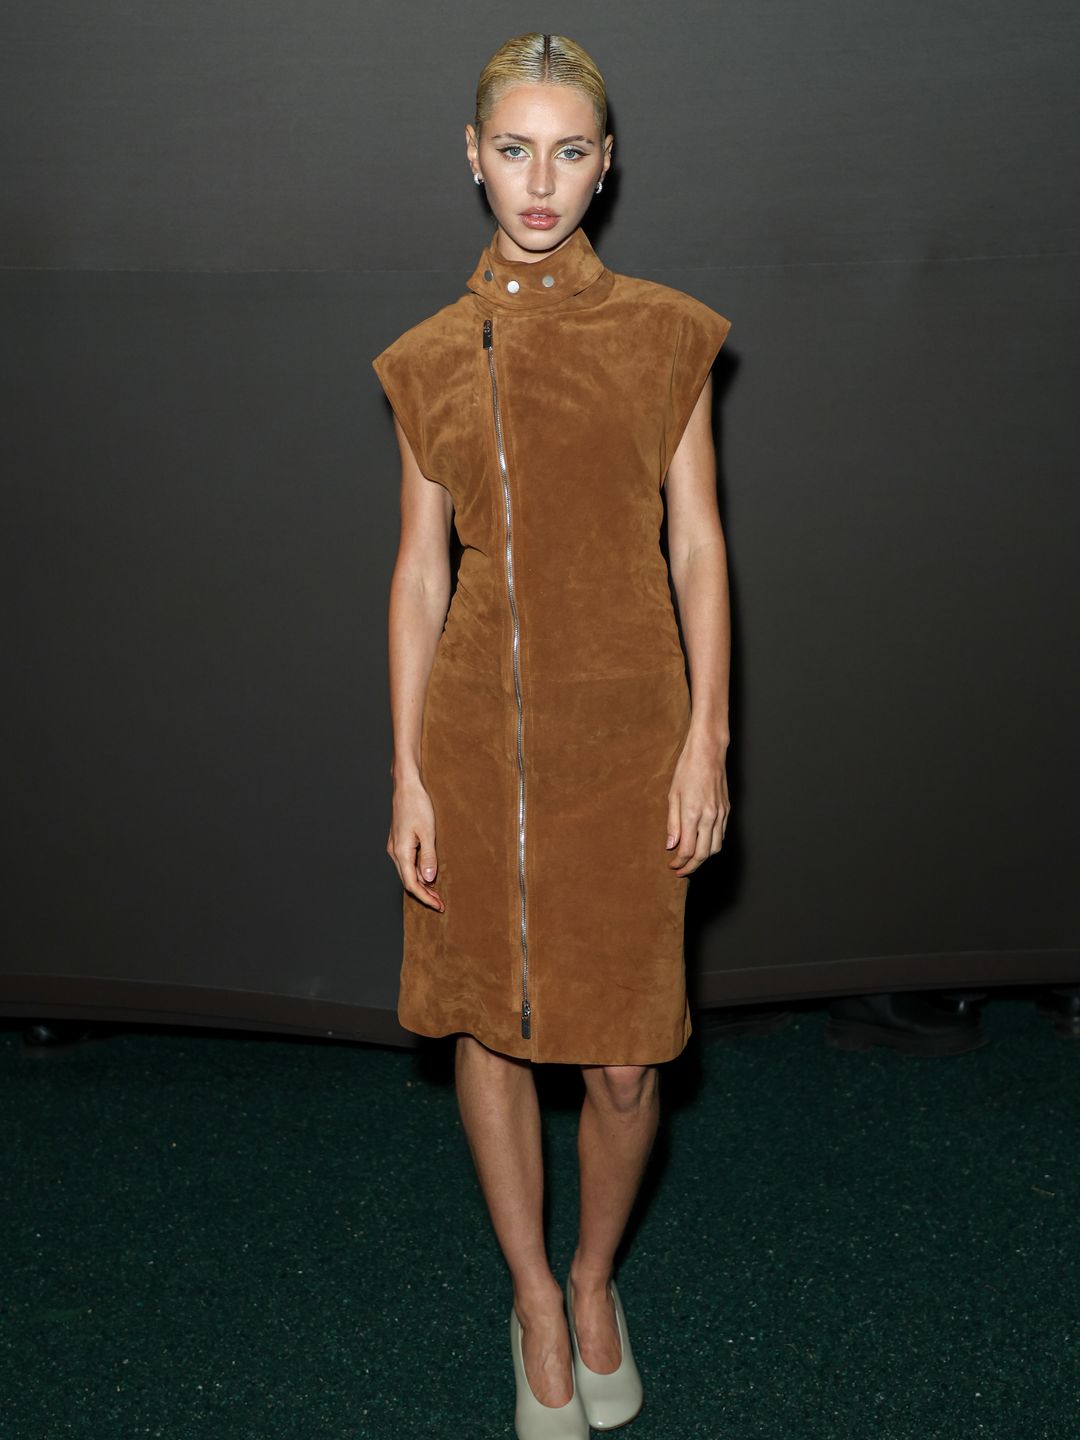 Iris Law attended the Burberry show in pure style, donning a suede brown midi dress and cream heels. 